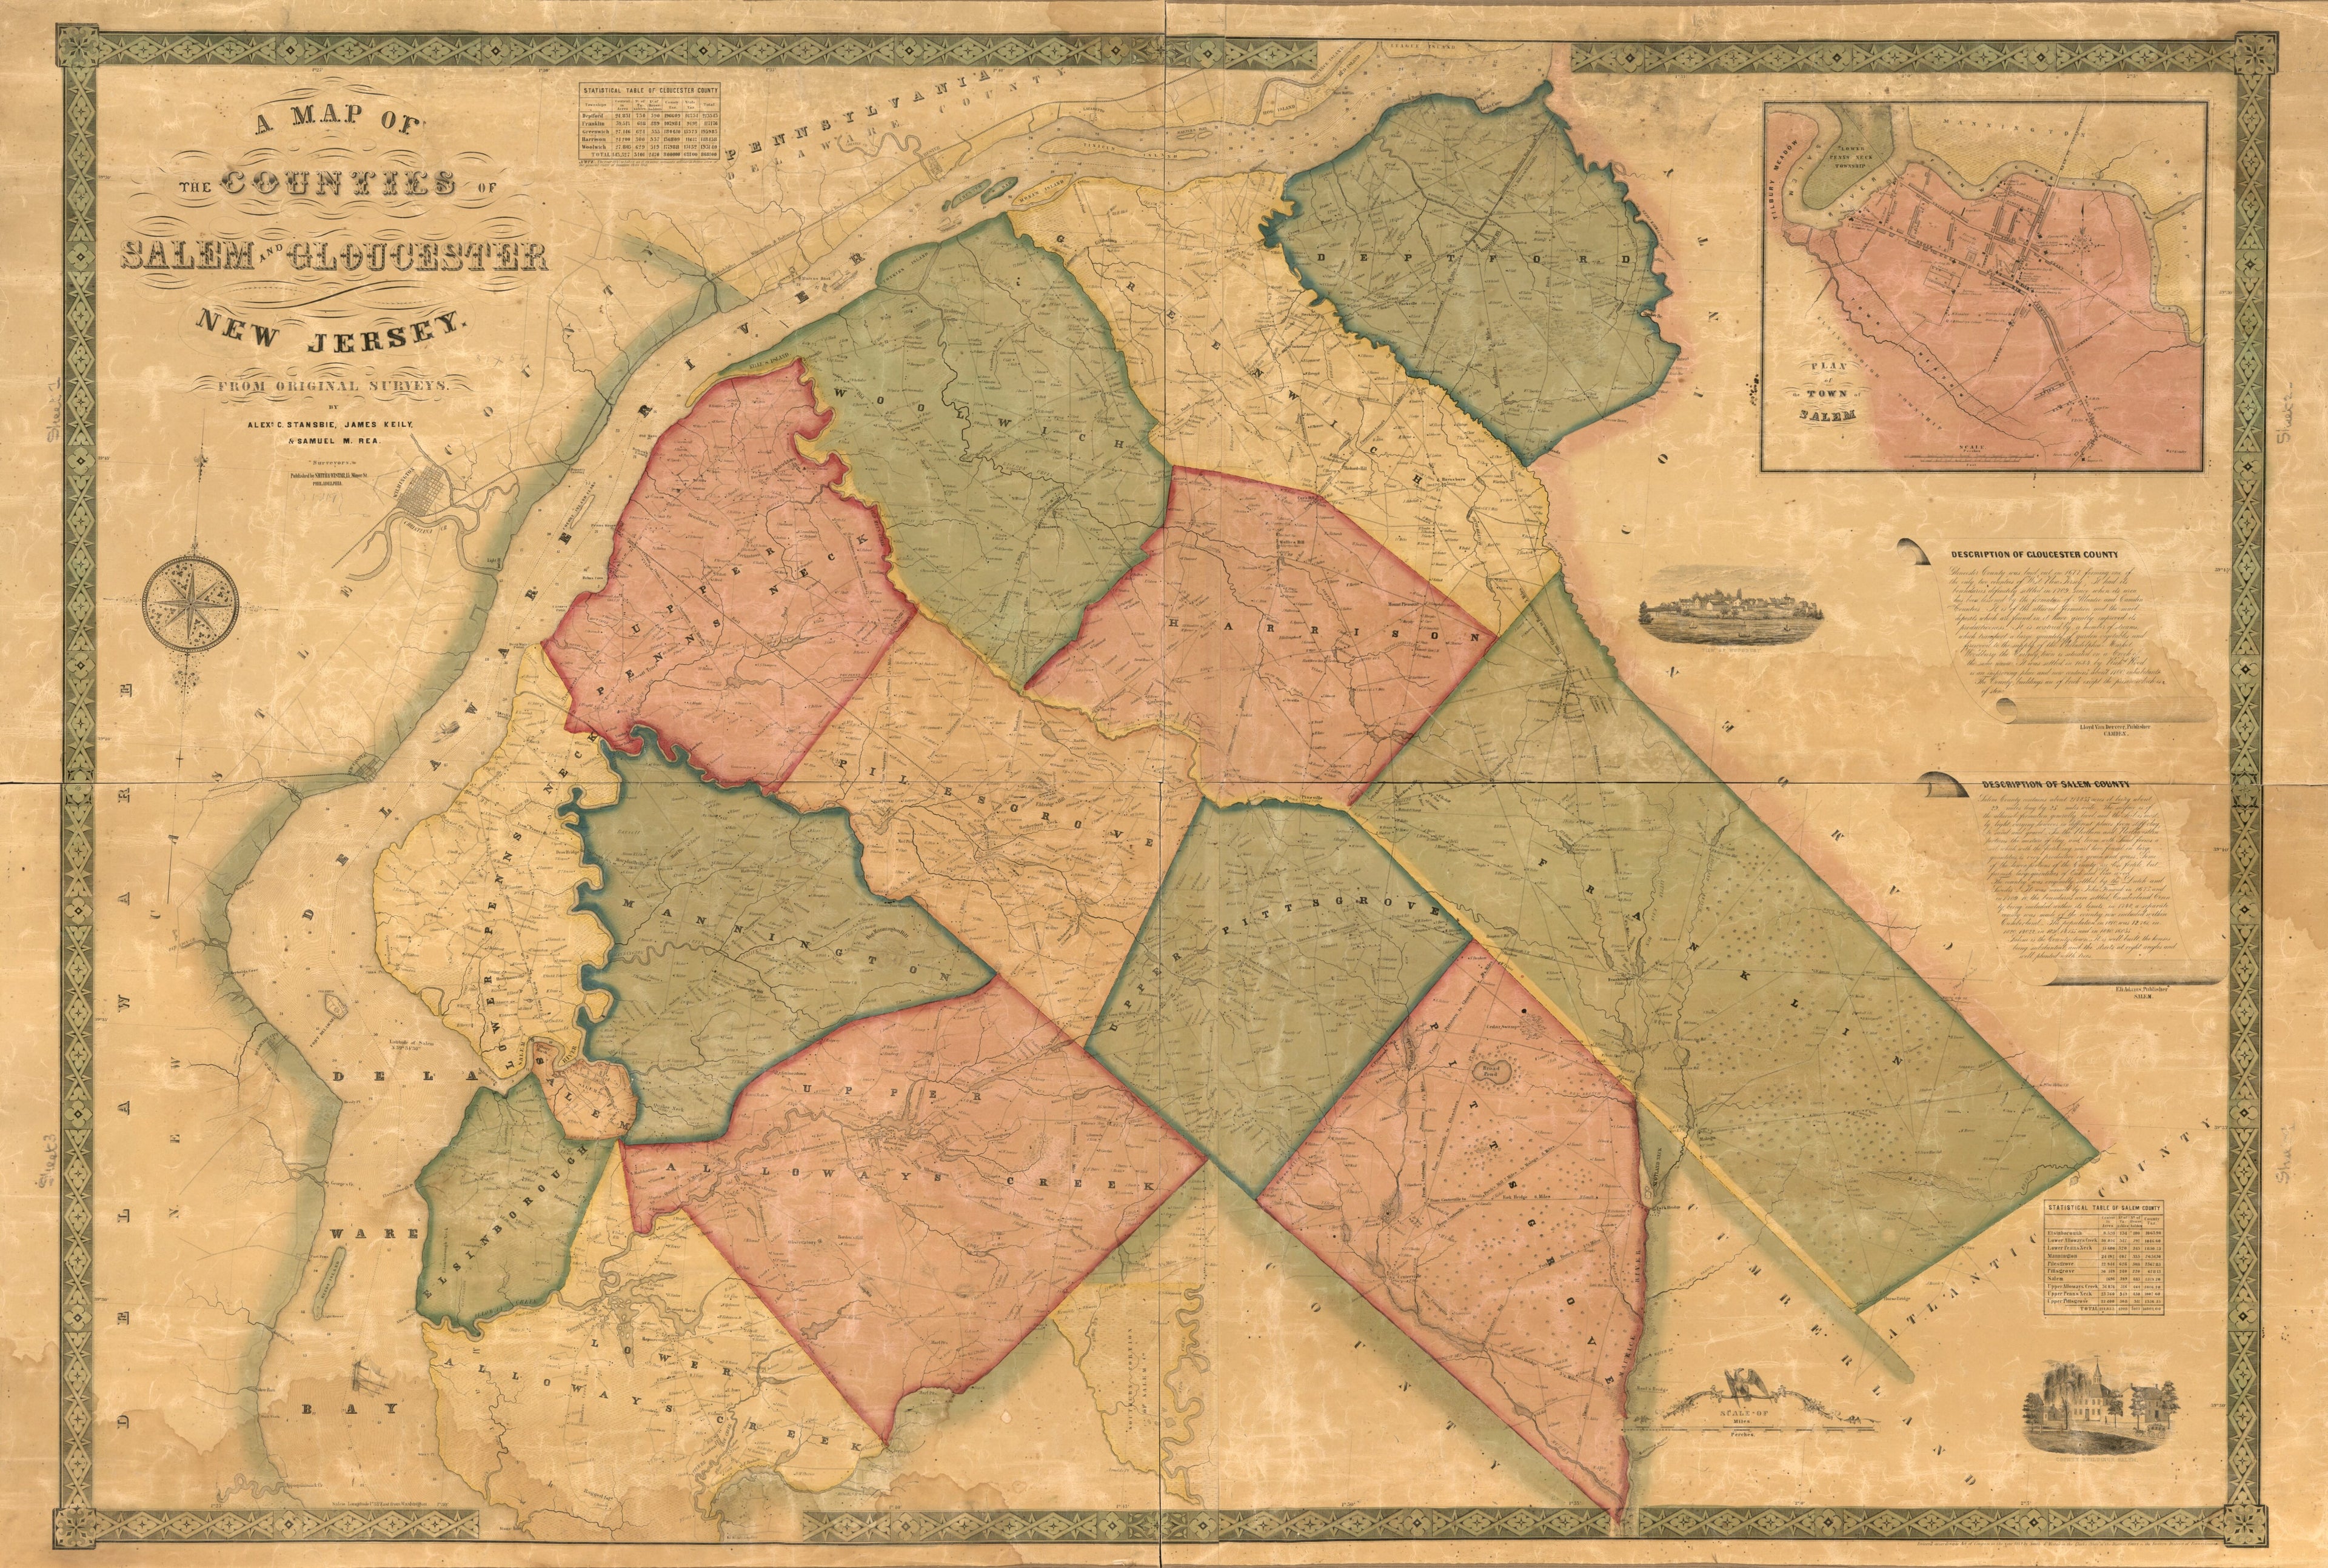 This old map of A Map of the Counties of Salem and Gloucester, New Jersey : from Actual Surveys from 1849 was created by James Keily, Samuel M. Rea,  Smith &amp; Wistar in 1849